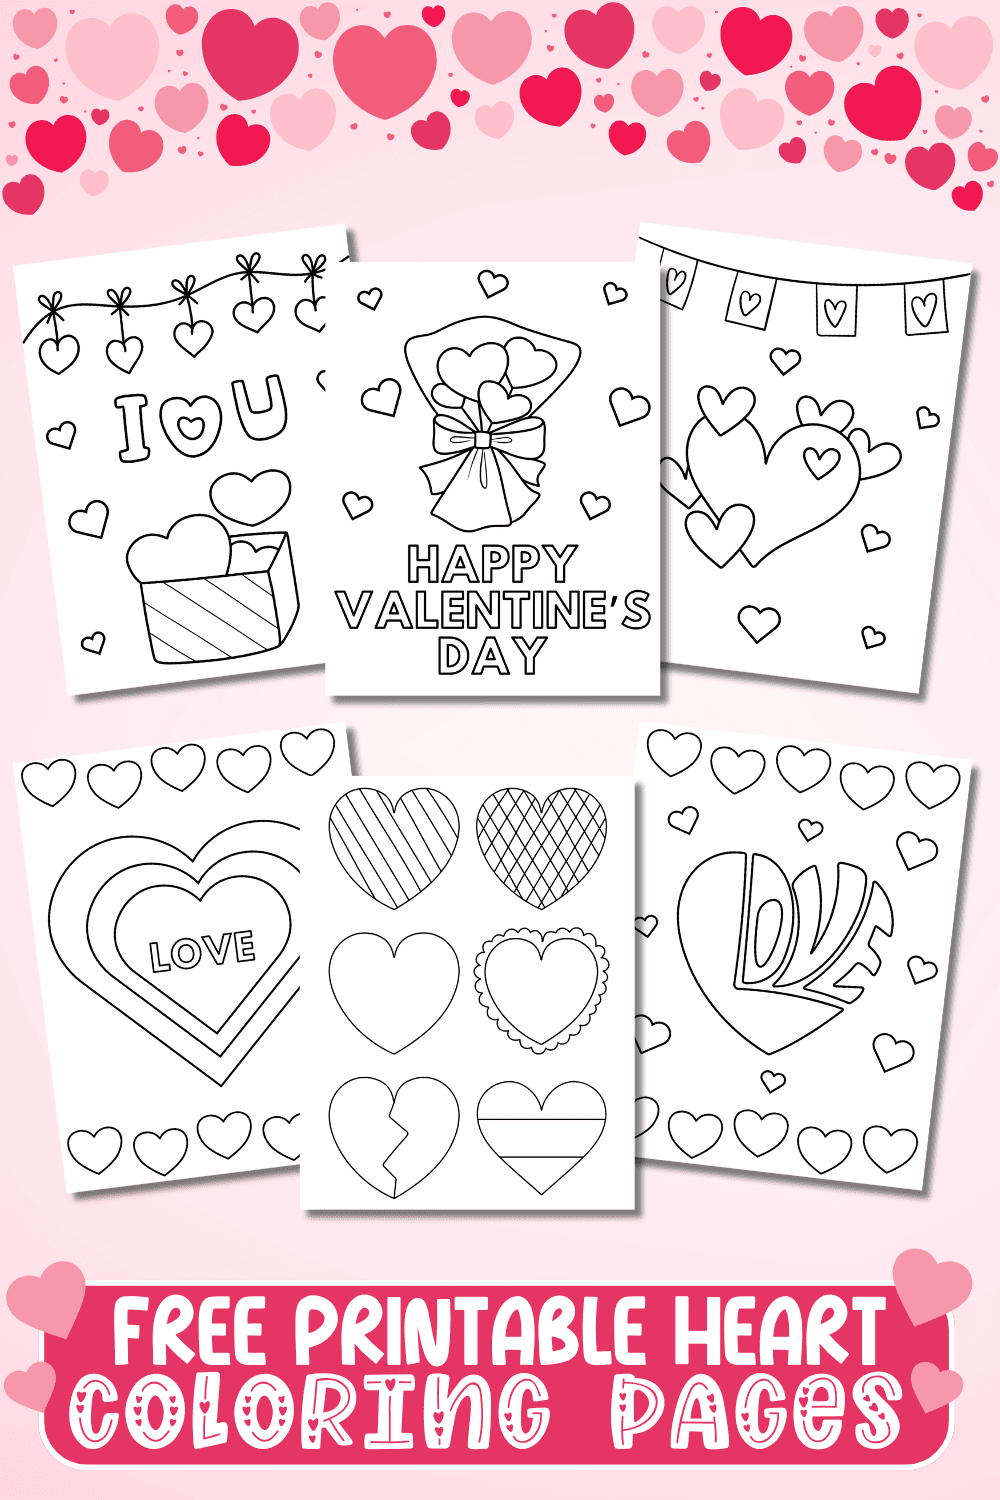 25 Free Heart Coloring Pages for Kids - Prudent Penny Pincher